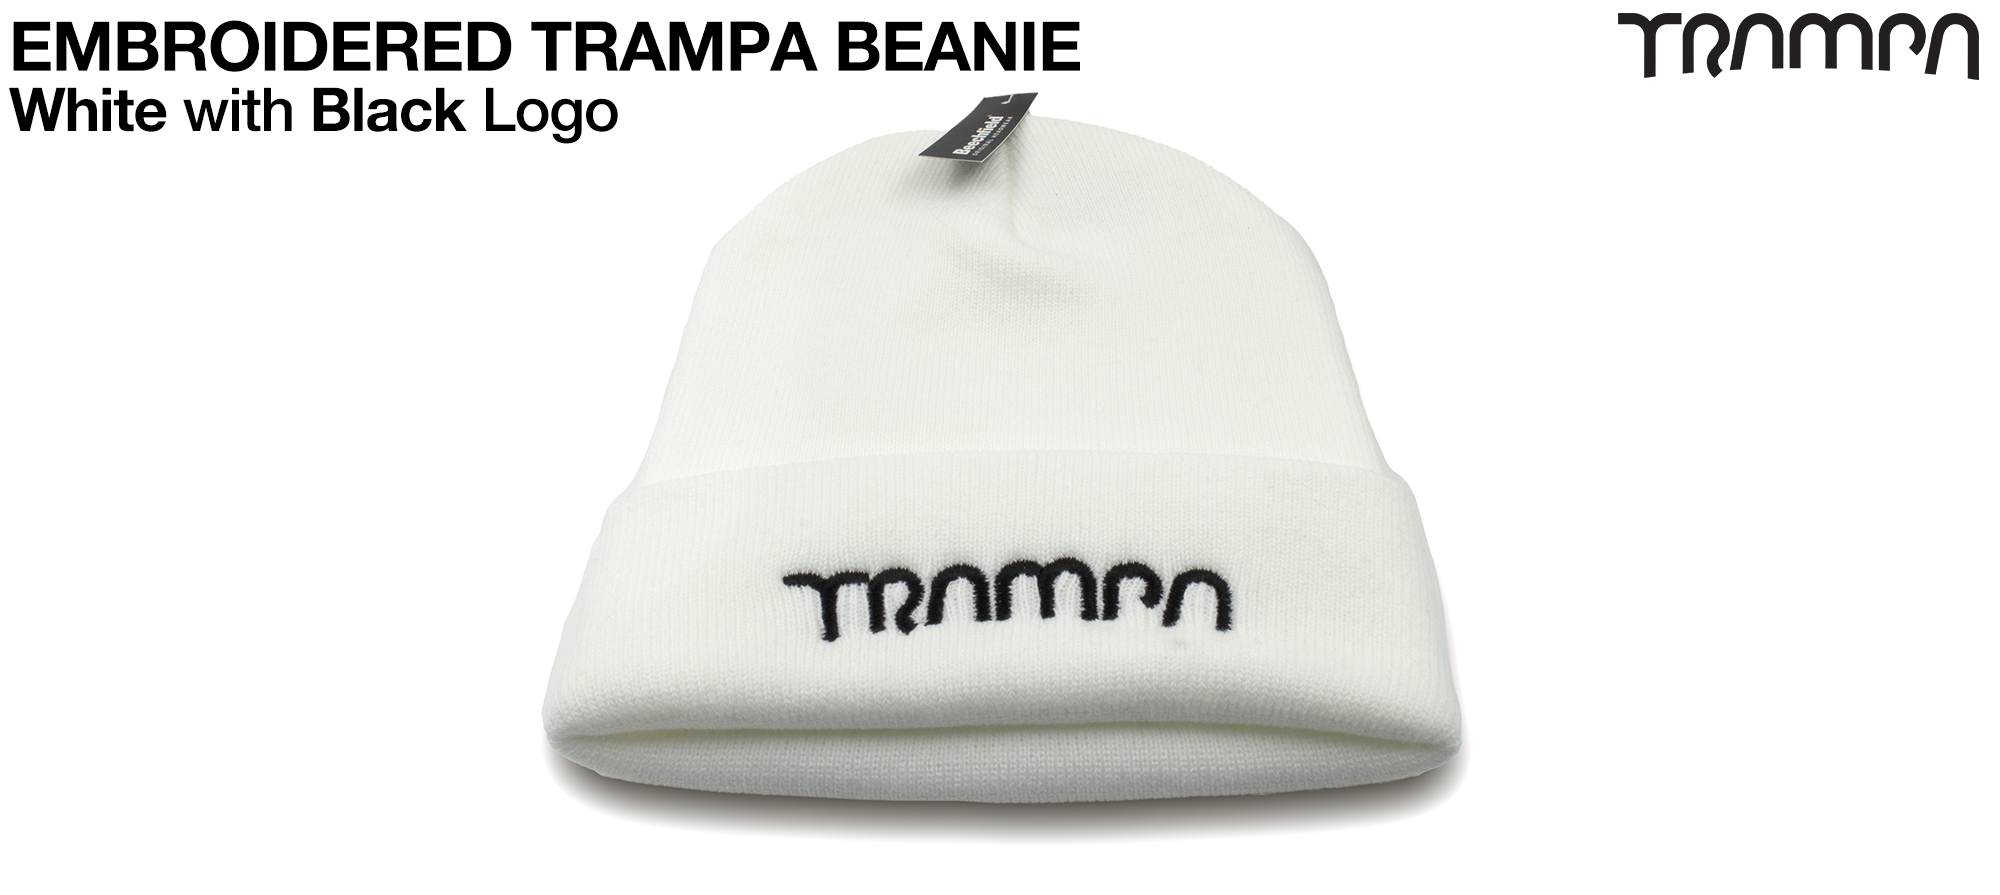 Snow WHITE Woolly hat with BLACK Embroidered TRAMPA logo - Double thick turn over for extra warmth